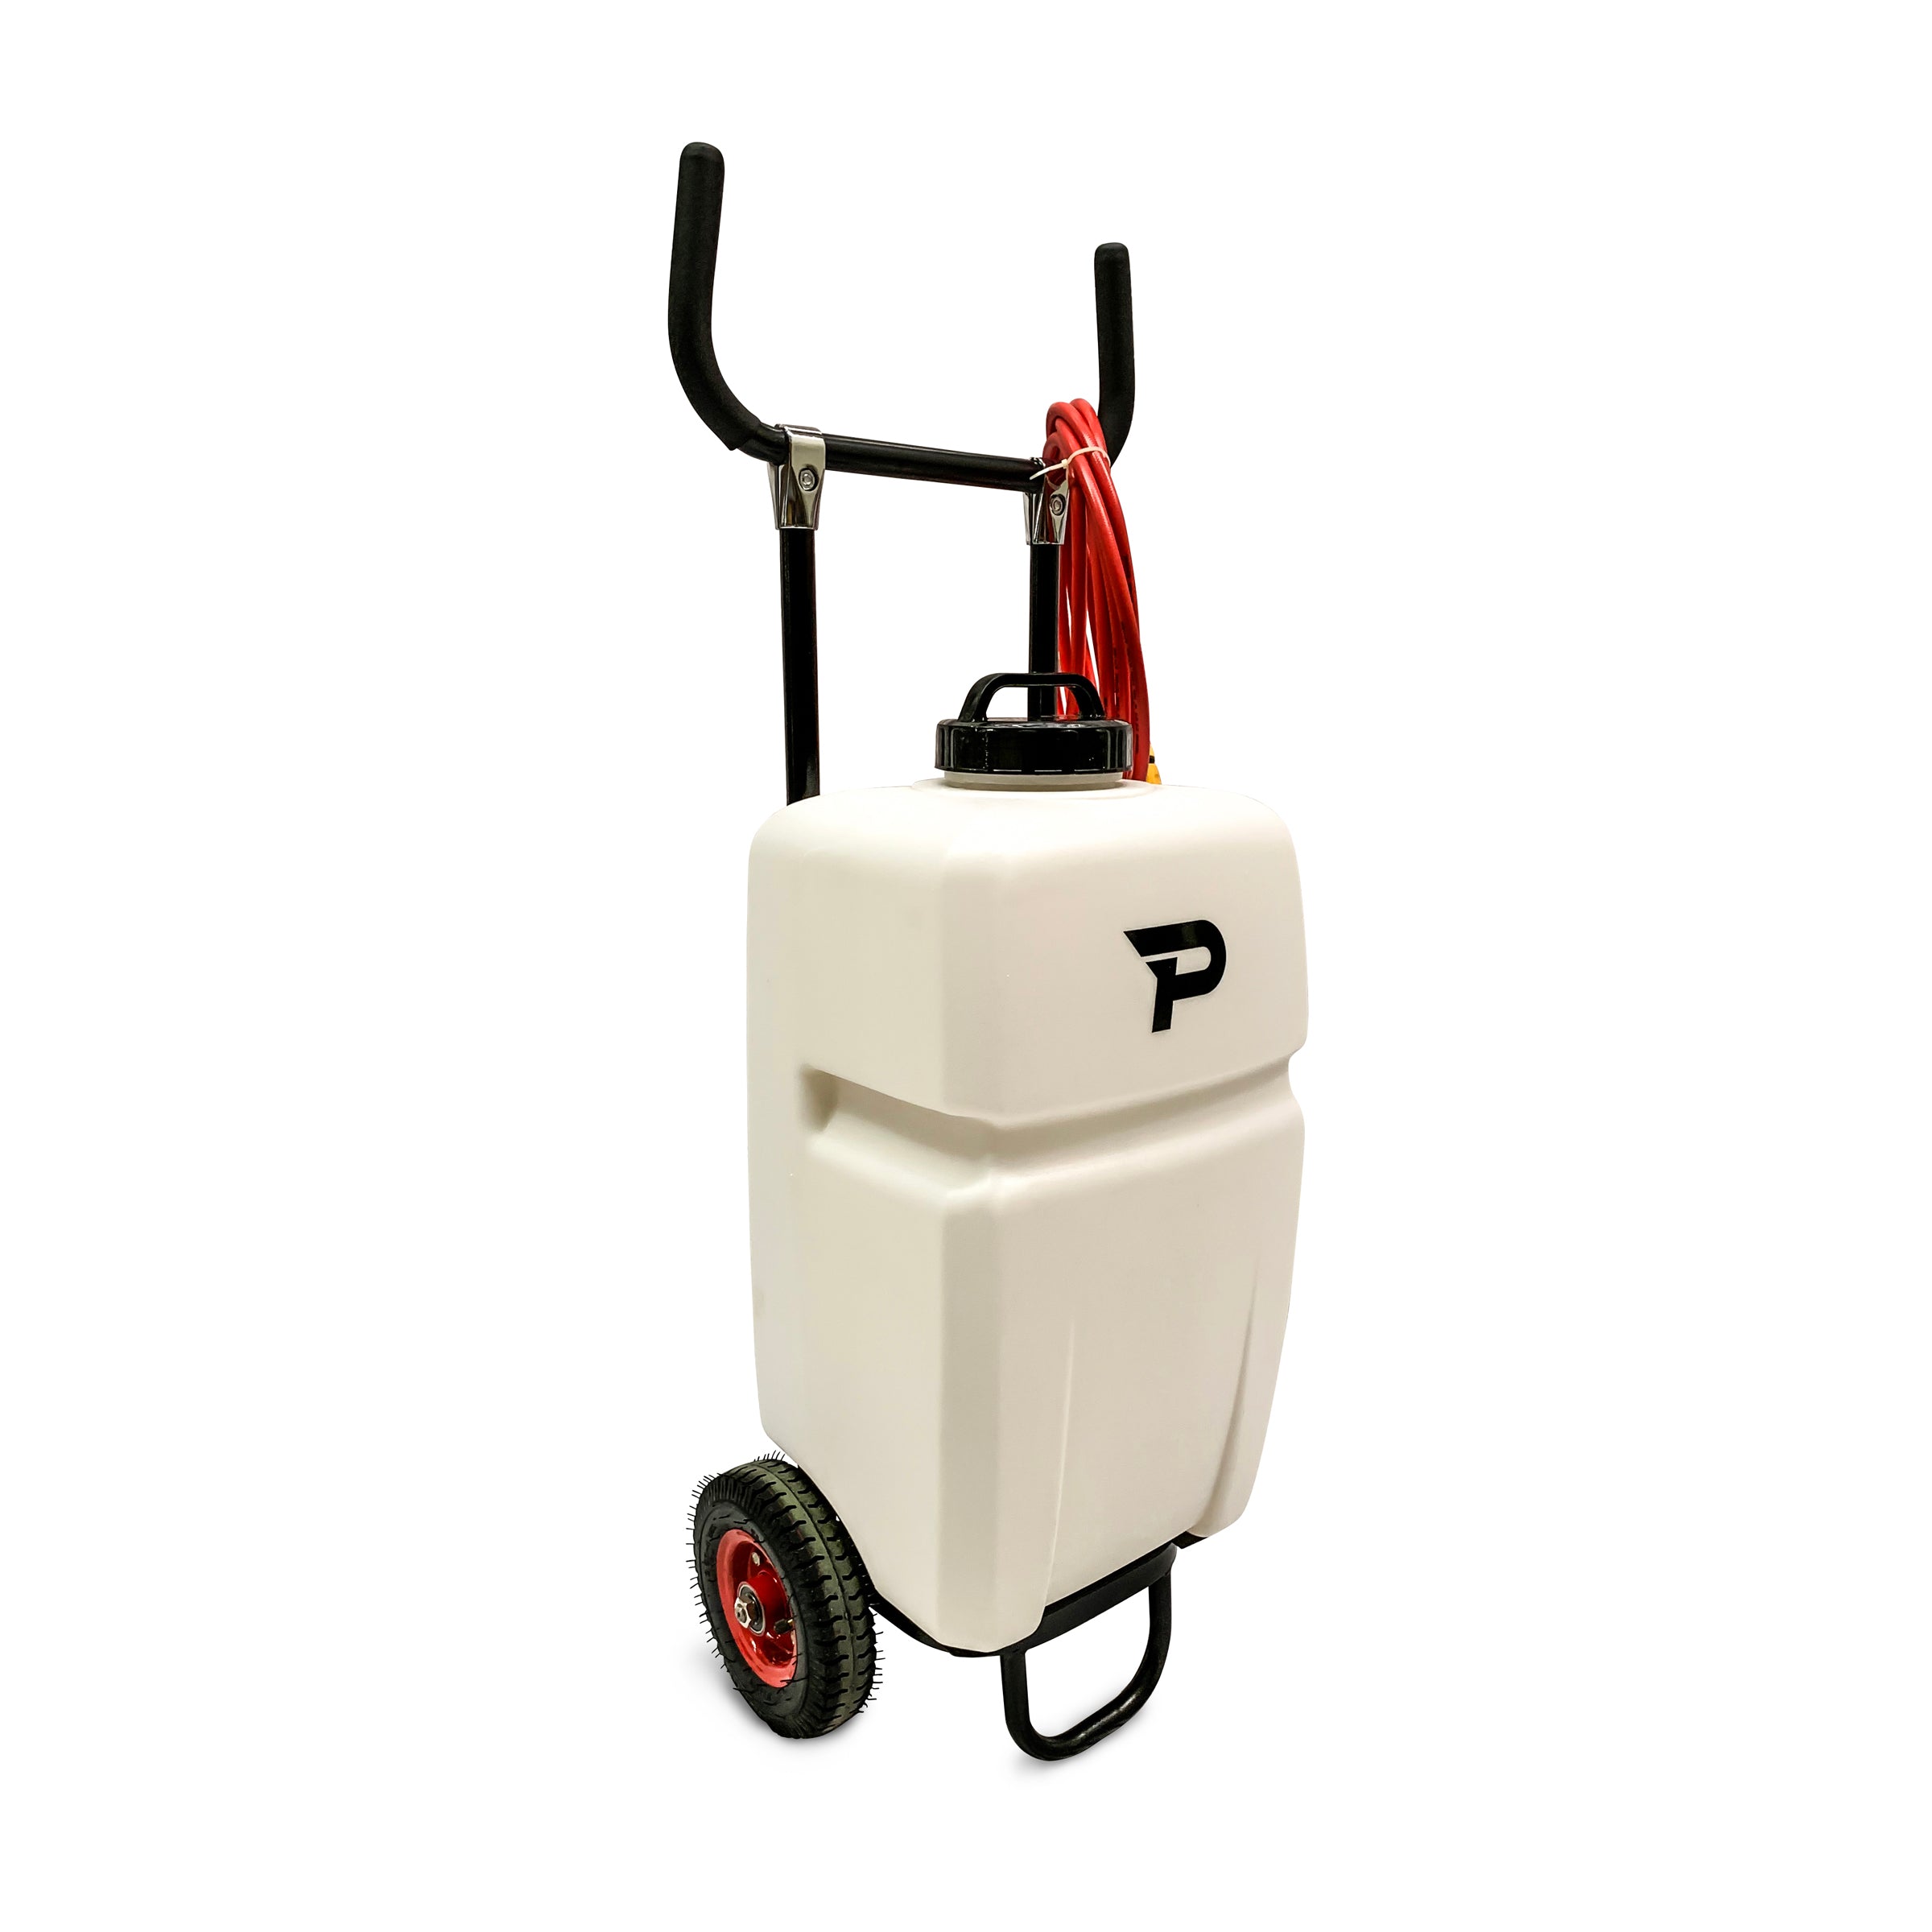 Mobile water tank with pump